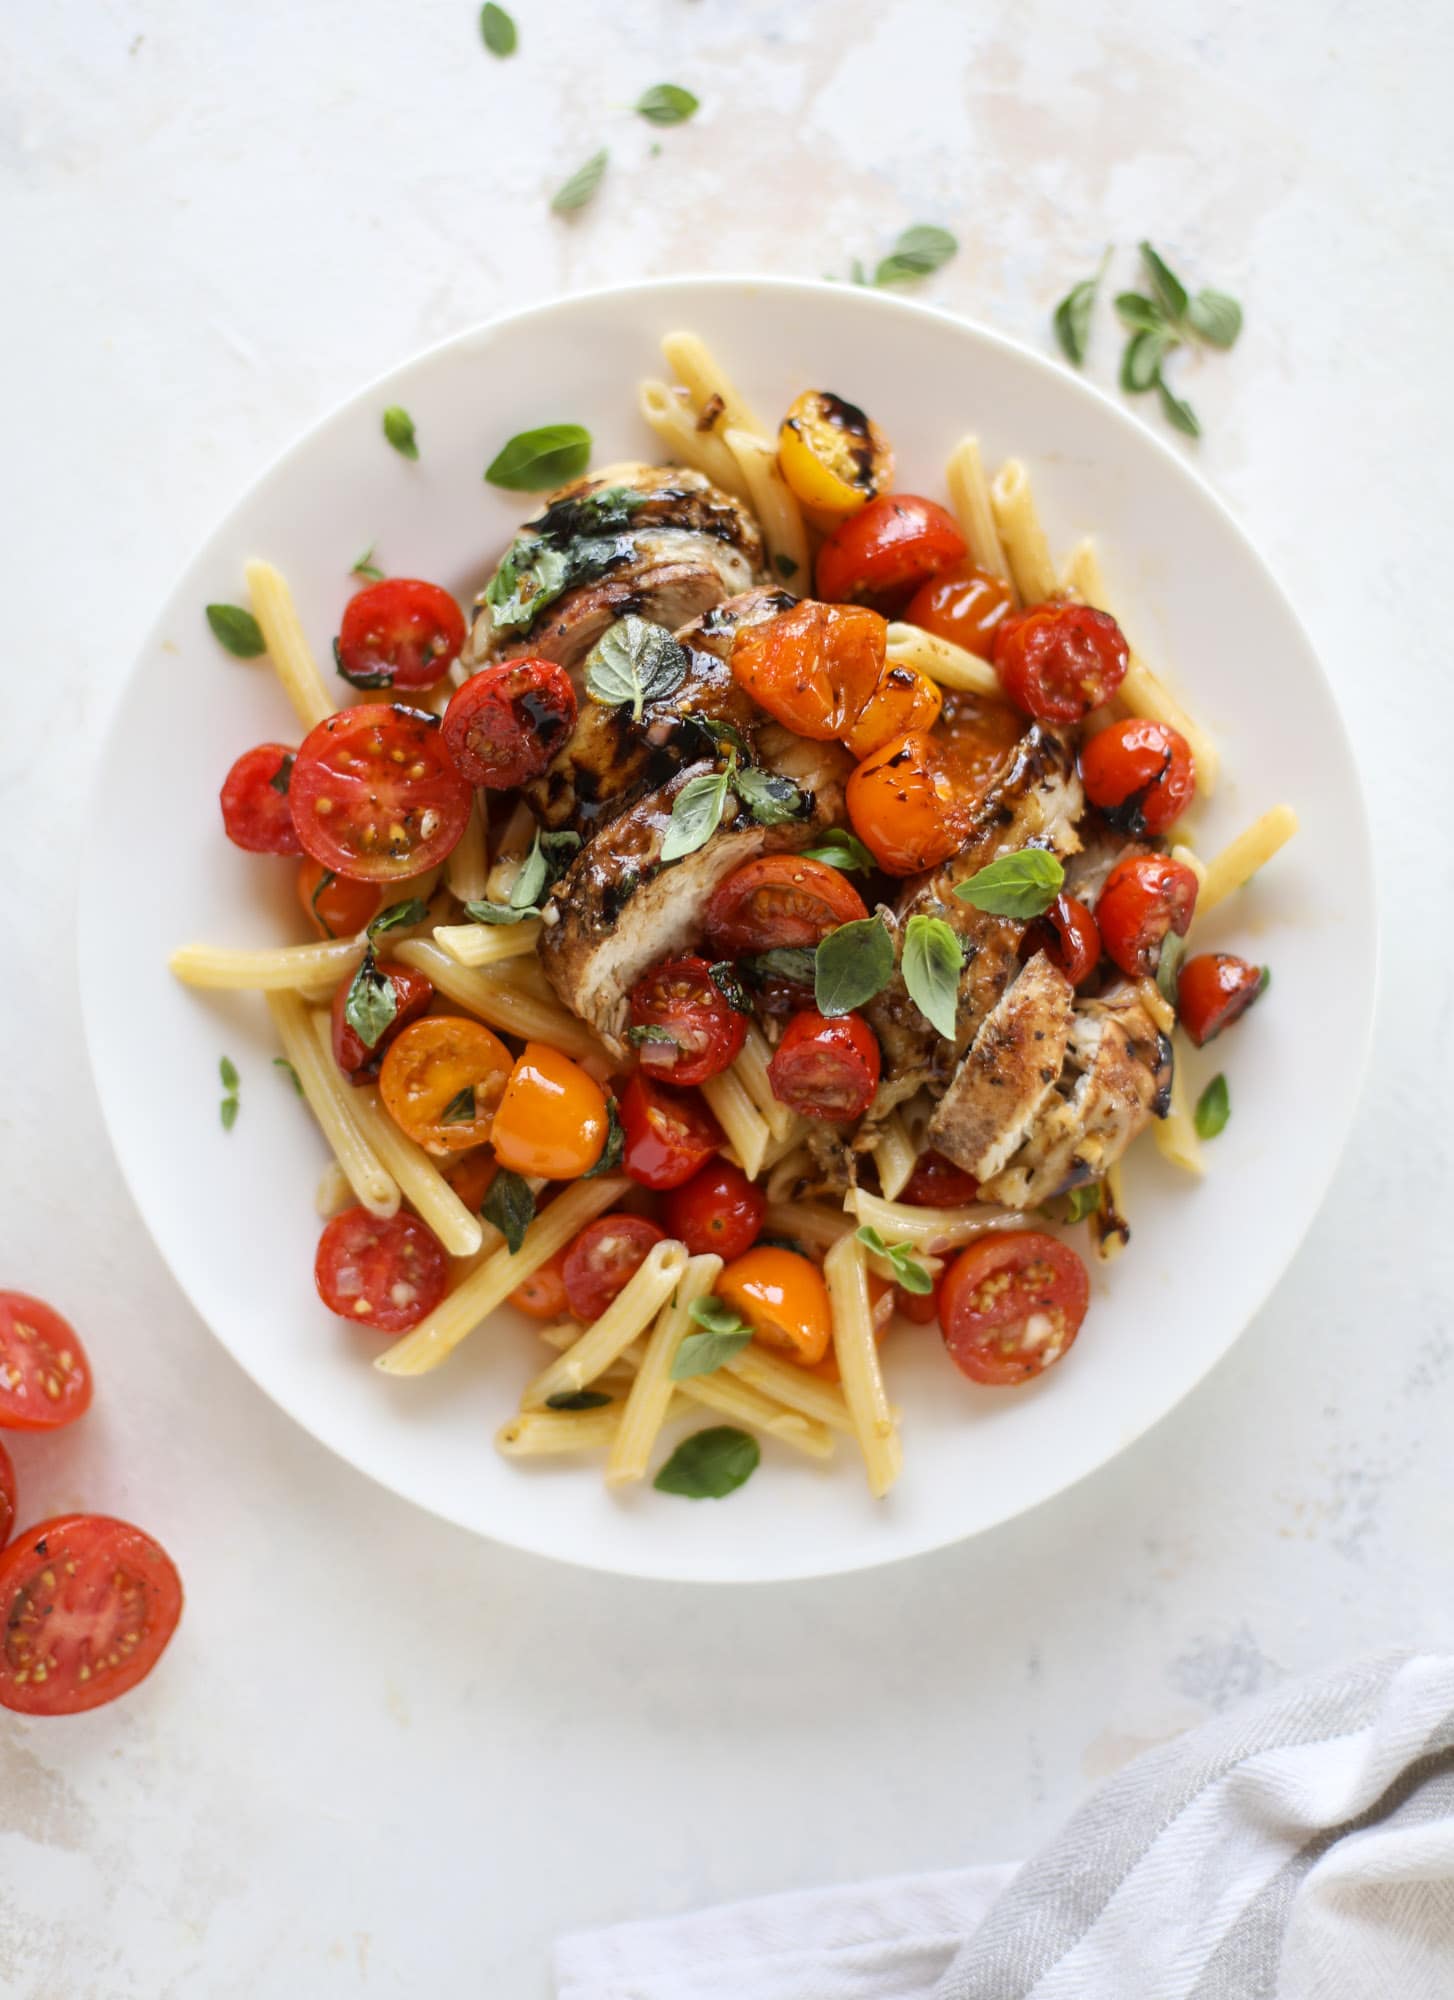 This bruschetta chicken is the perfect summer garden meal! Juicy, flavorful chicken topped with fresh tomatoes, garlic, basil and balsamic glaze, along with a touch of cheese. Served with pasta, it's an incredible meal. I howsweeteats.com #bruschetta #chicken #pasta #tomatoes #basil 